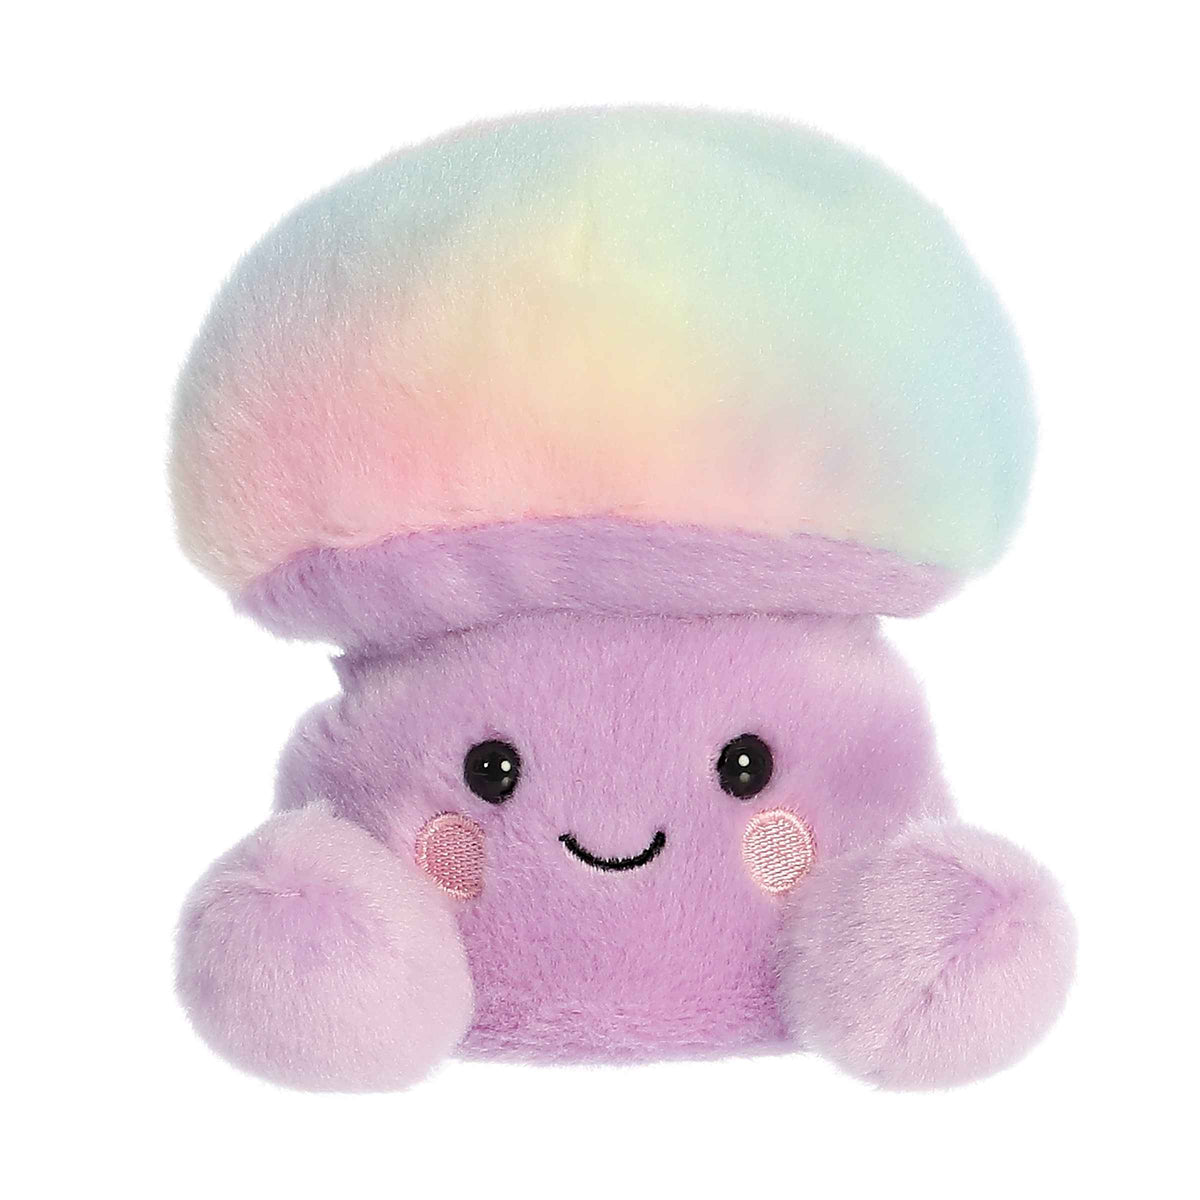 Lunette Mushroom plush from Palm Pals, purple stalk with ombre pink mushroom cap